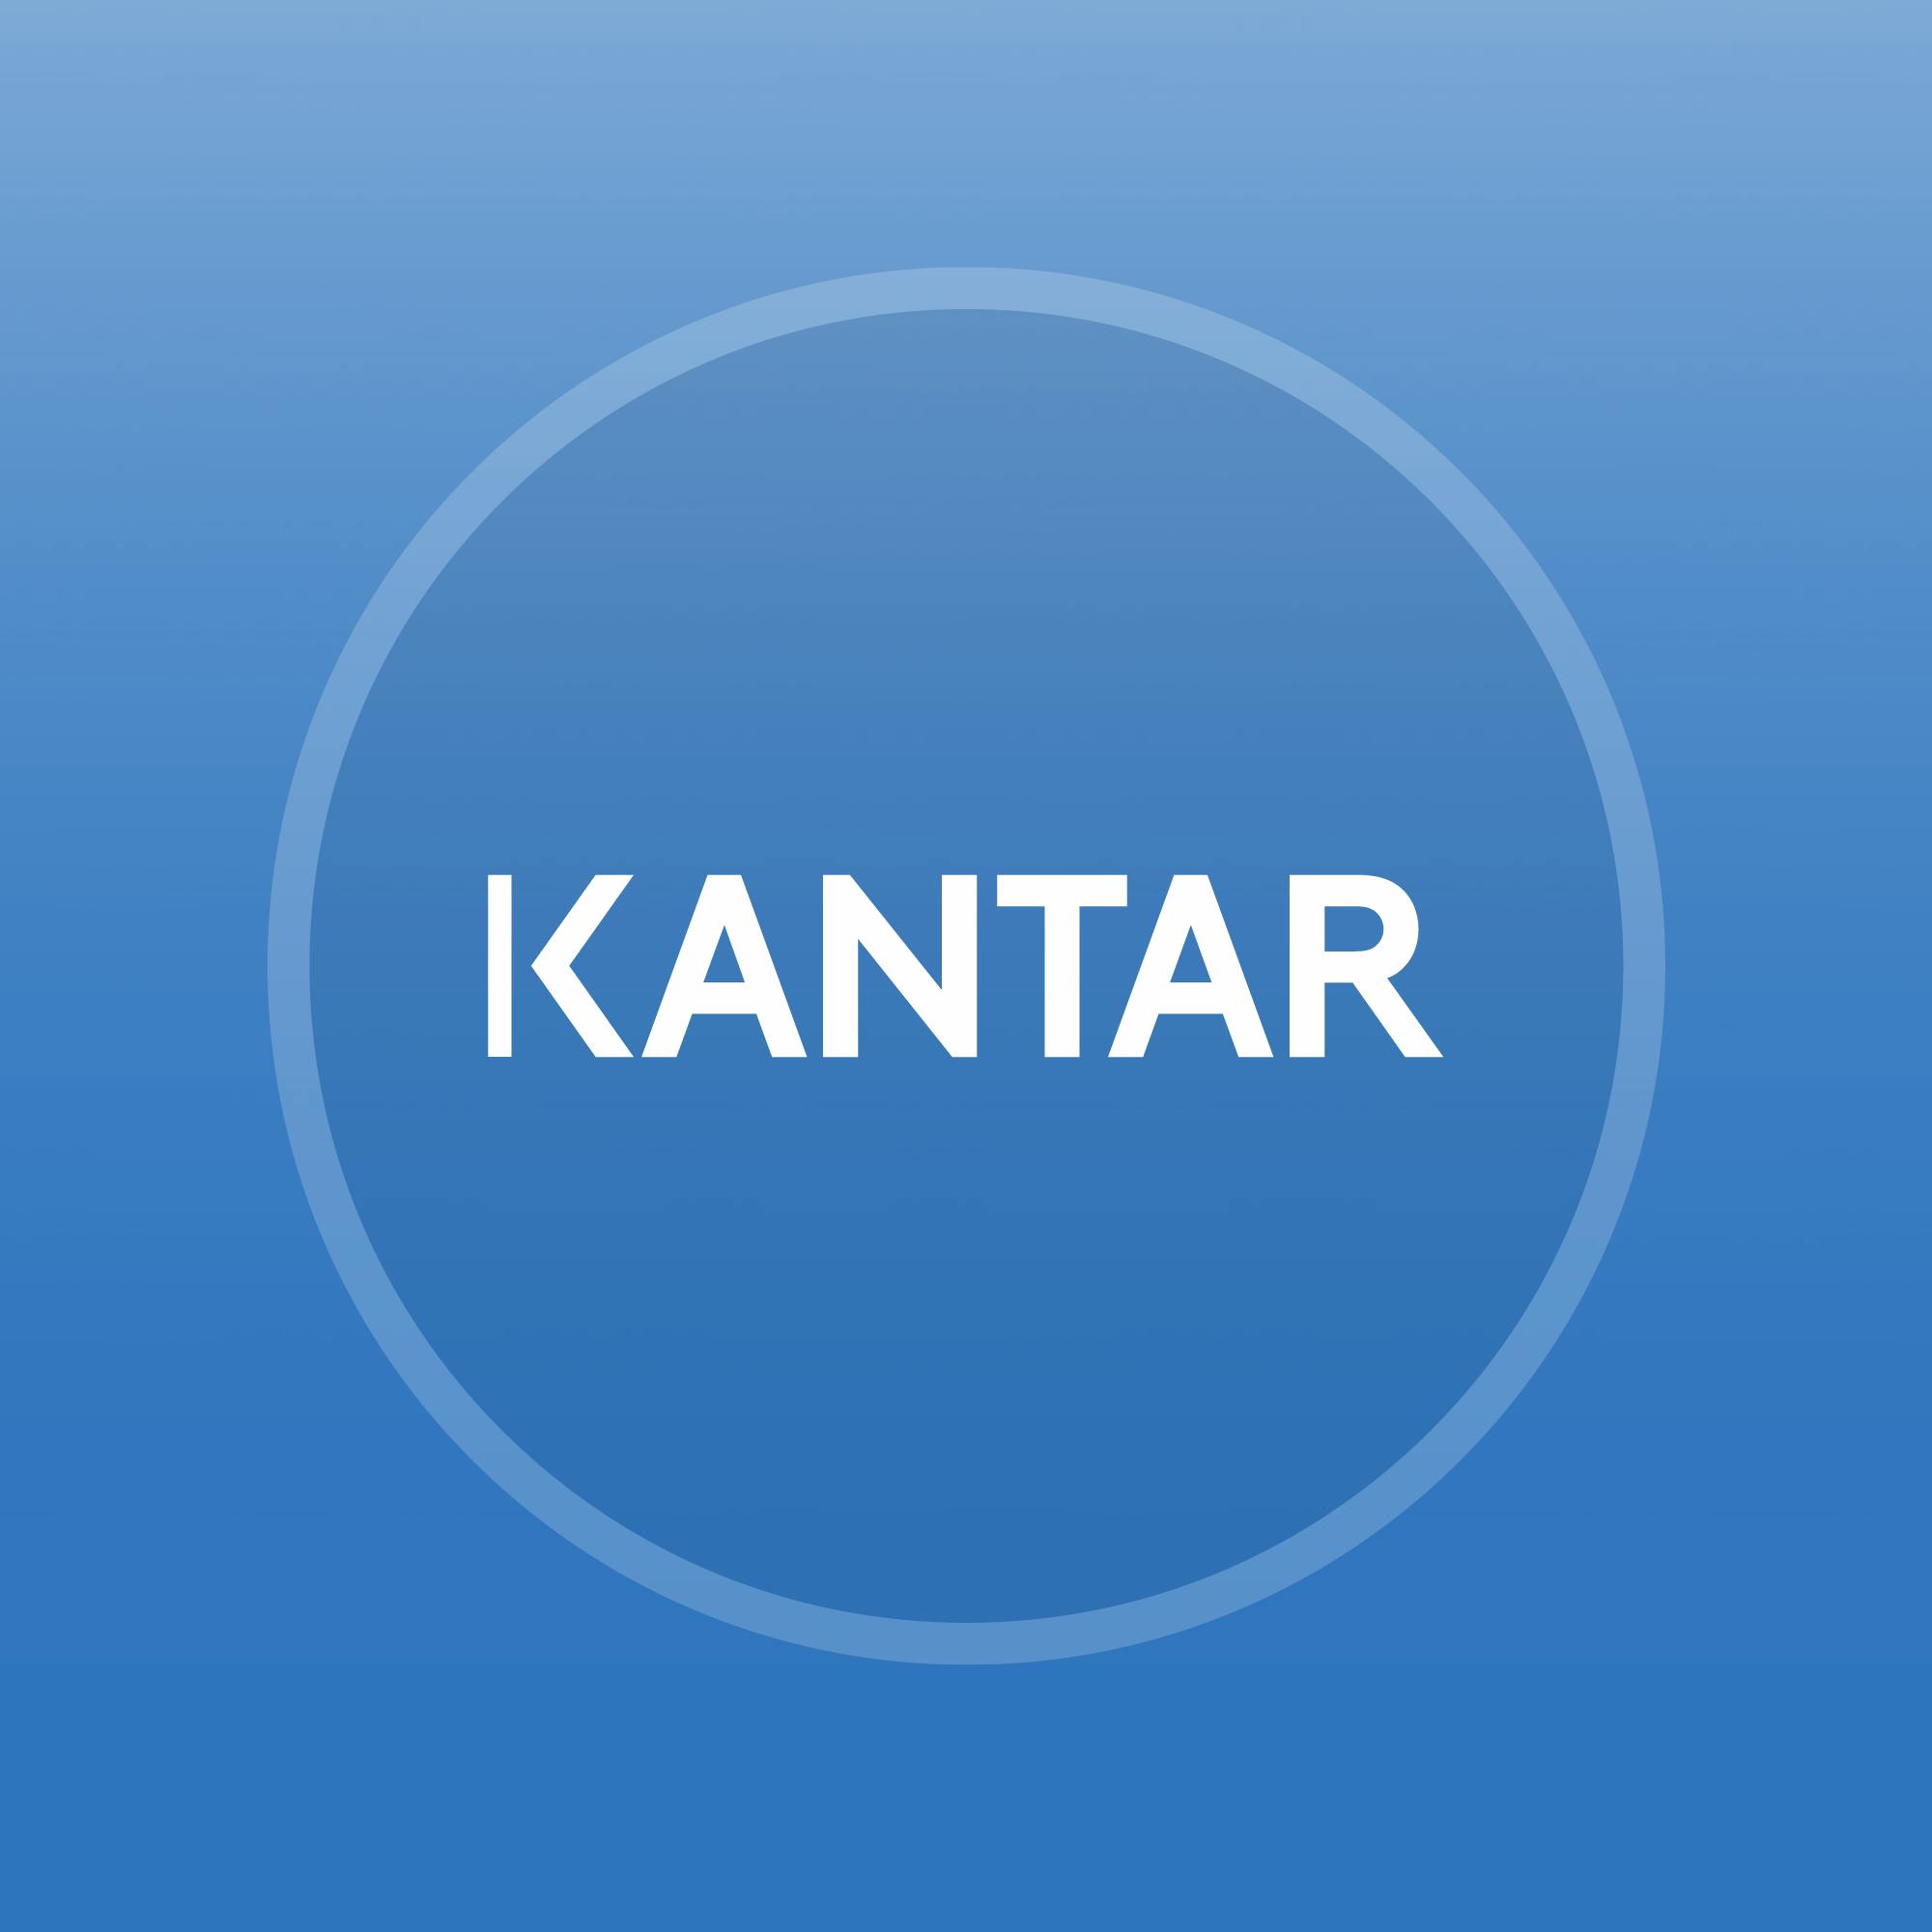 TRI*M Customer Relationship Strategy by Kantar